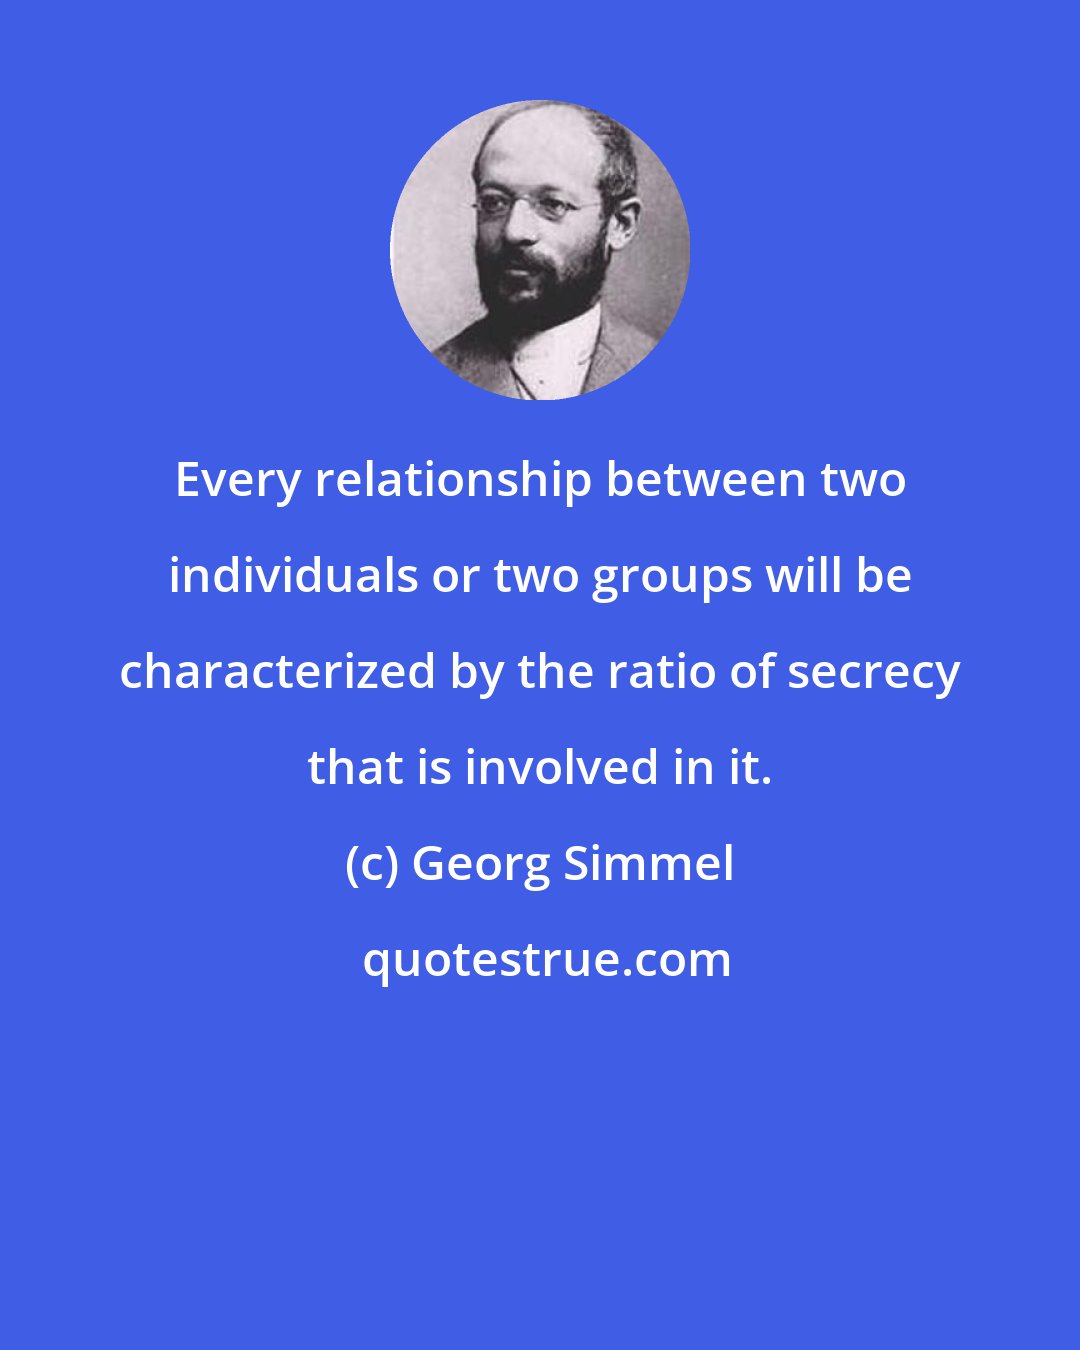 Georg Simmel: Every relationship between two individuals or two groups will be characterized by the ratio of secrecy that is involved in it.